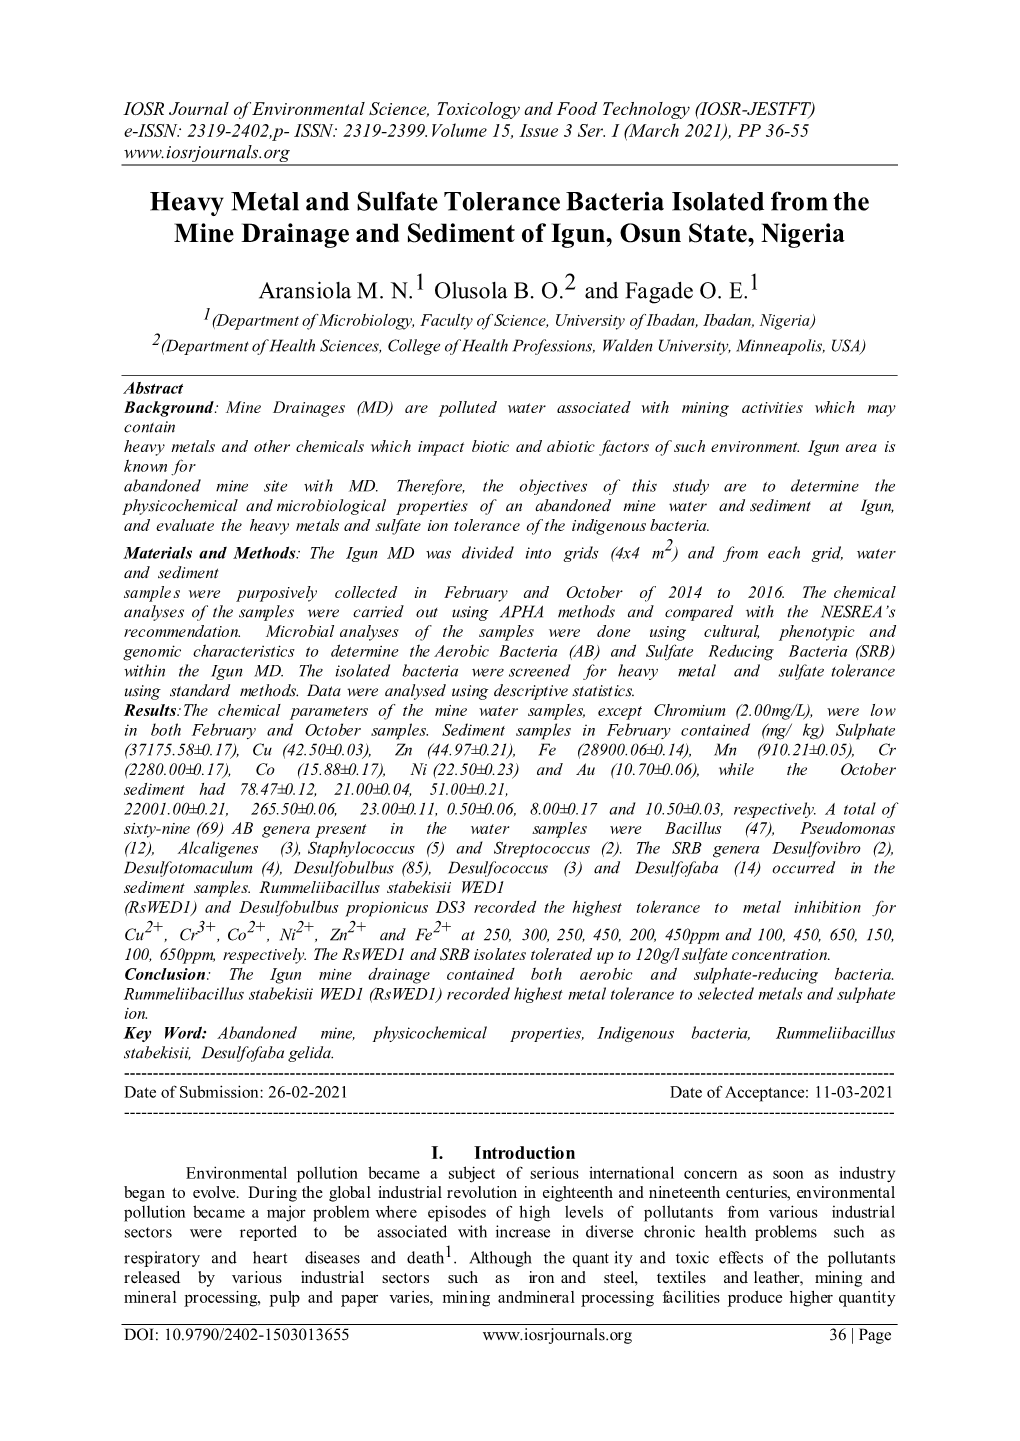 Heavy Metal and Sulfate Tolerance Bacteria Isolated from the Mine Drainage and Sediment of Igun, Osun State, Nigeria